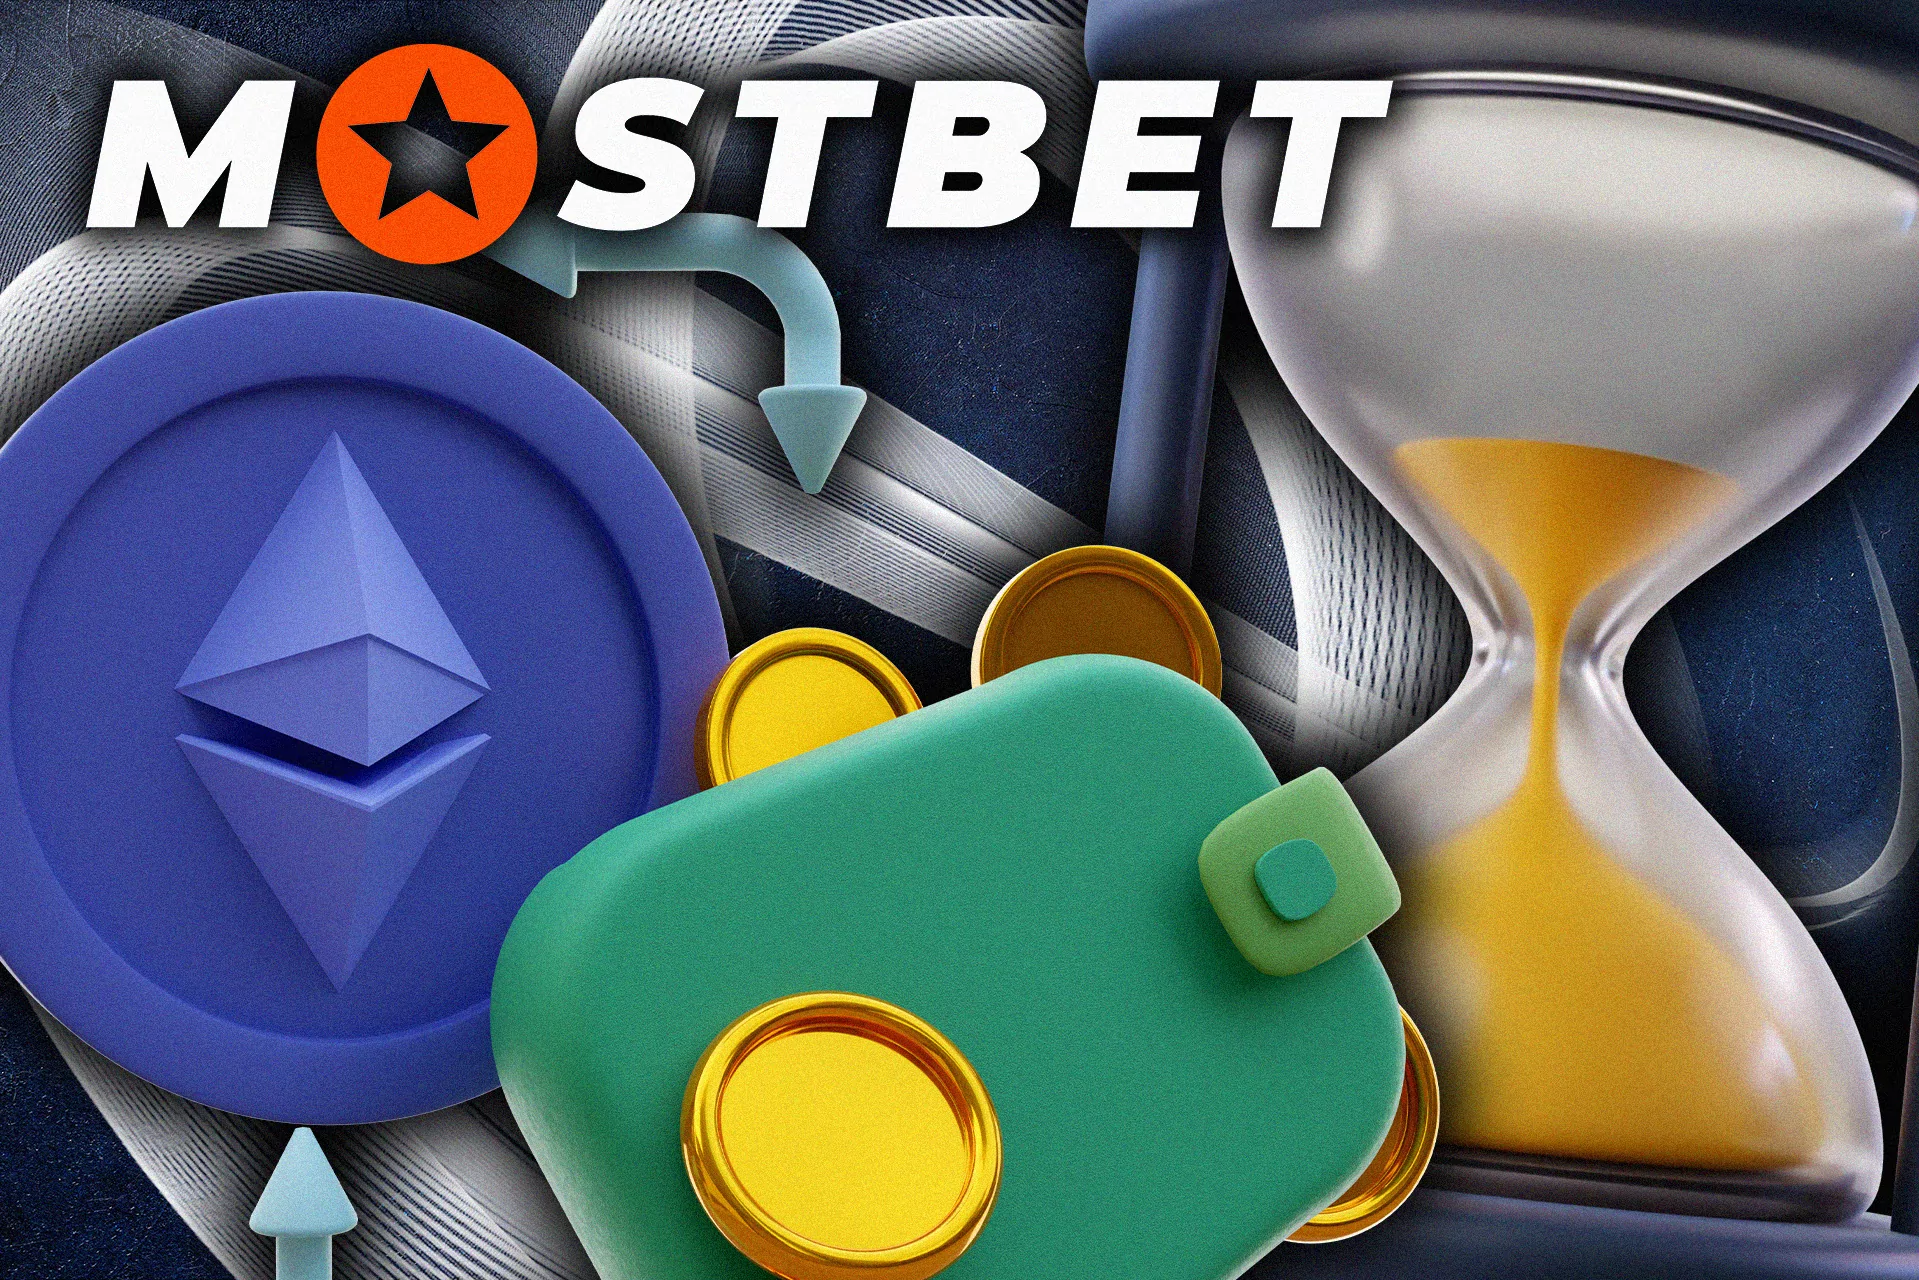 You can quickly and easily deposit or withdraw money from Mostbet.